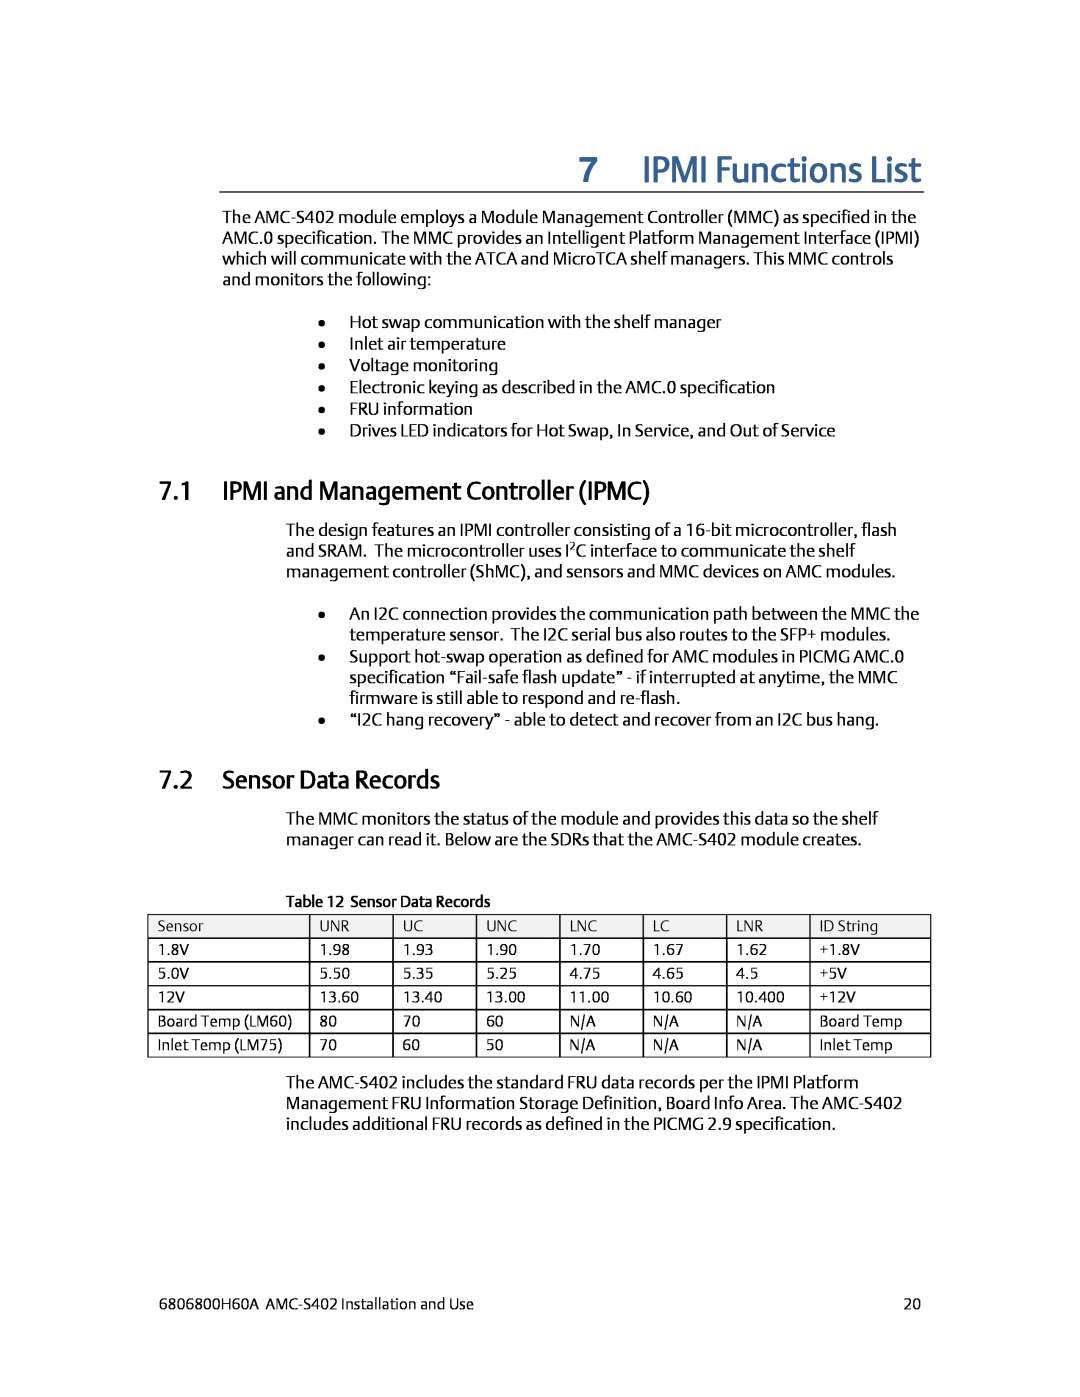 Emerson AMC-S402 manual IPMI Functions List, IPMI and Management Controller IPMC, Sensor Data Records 